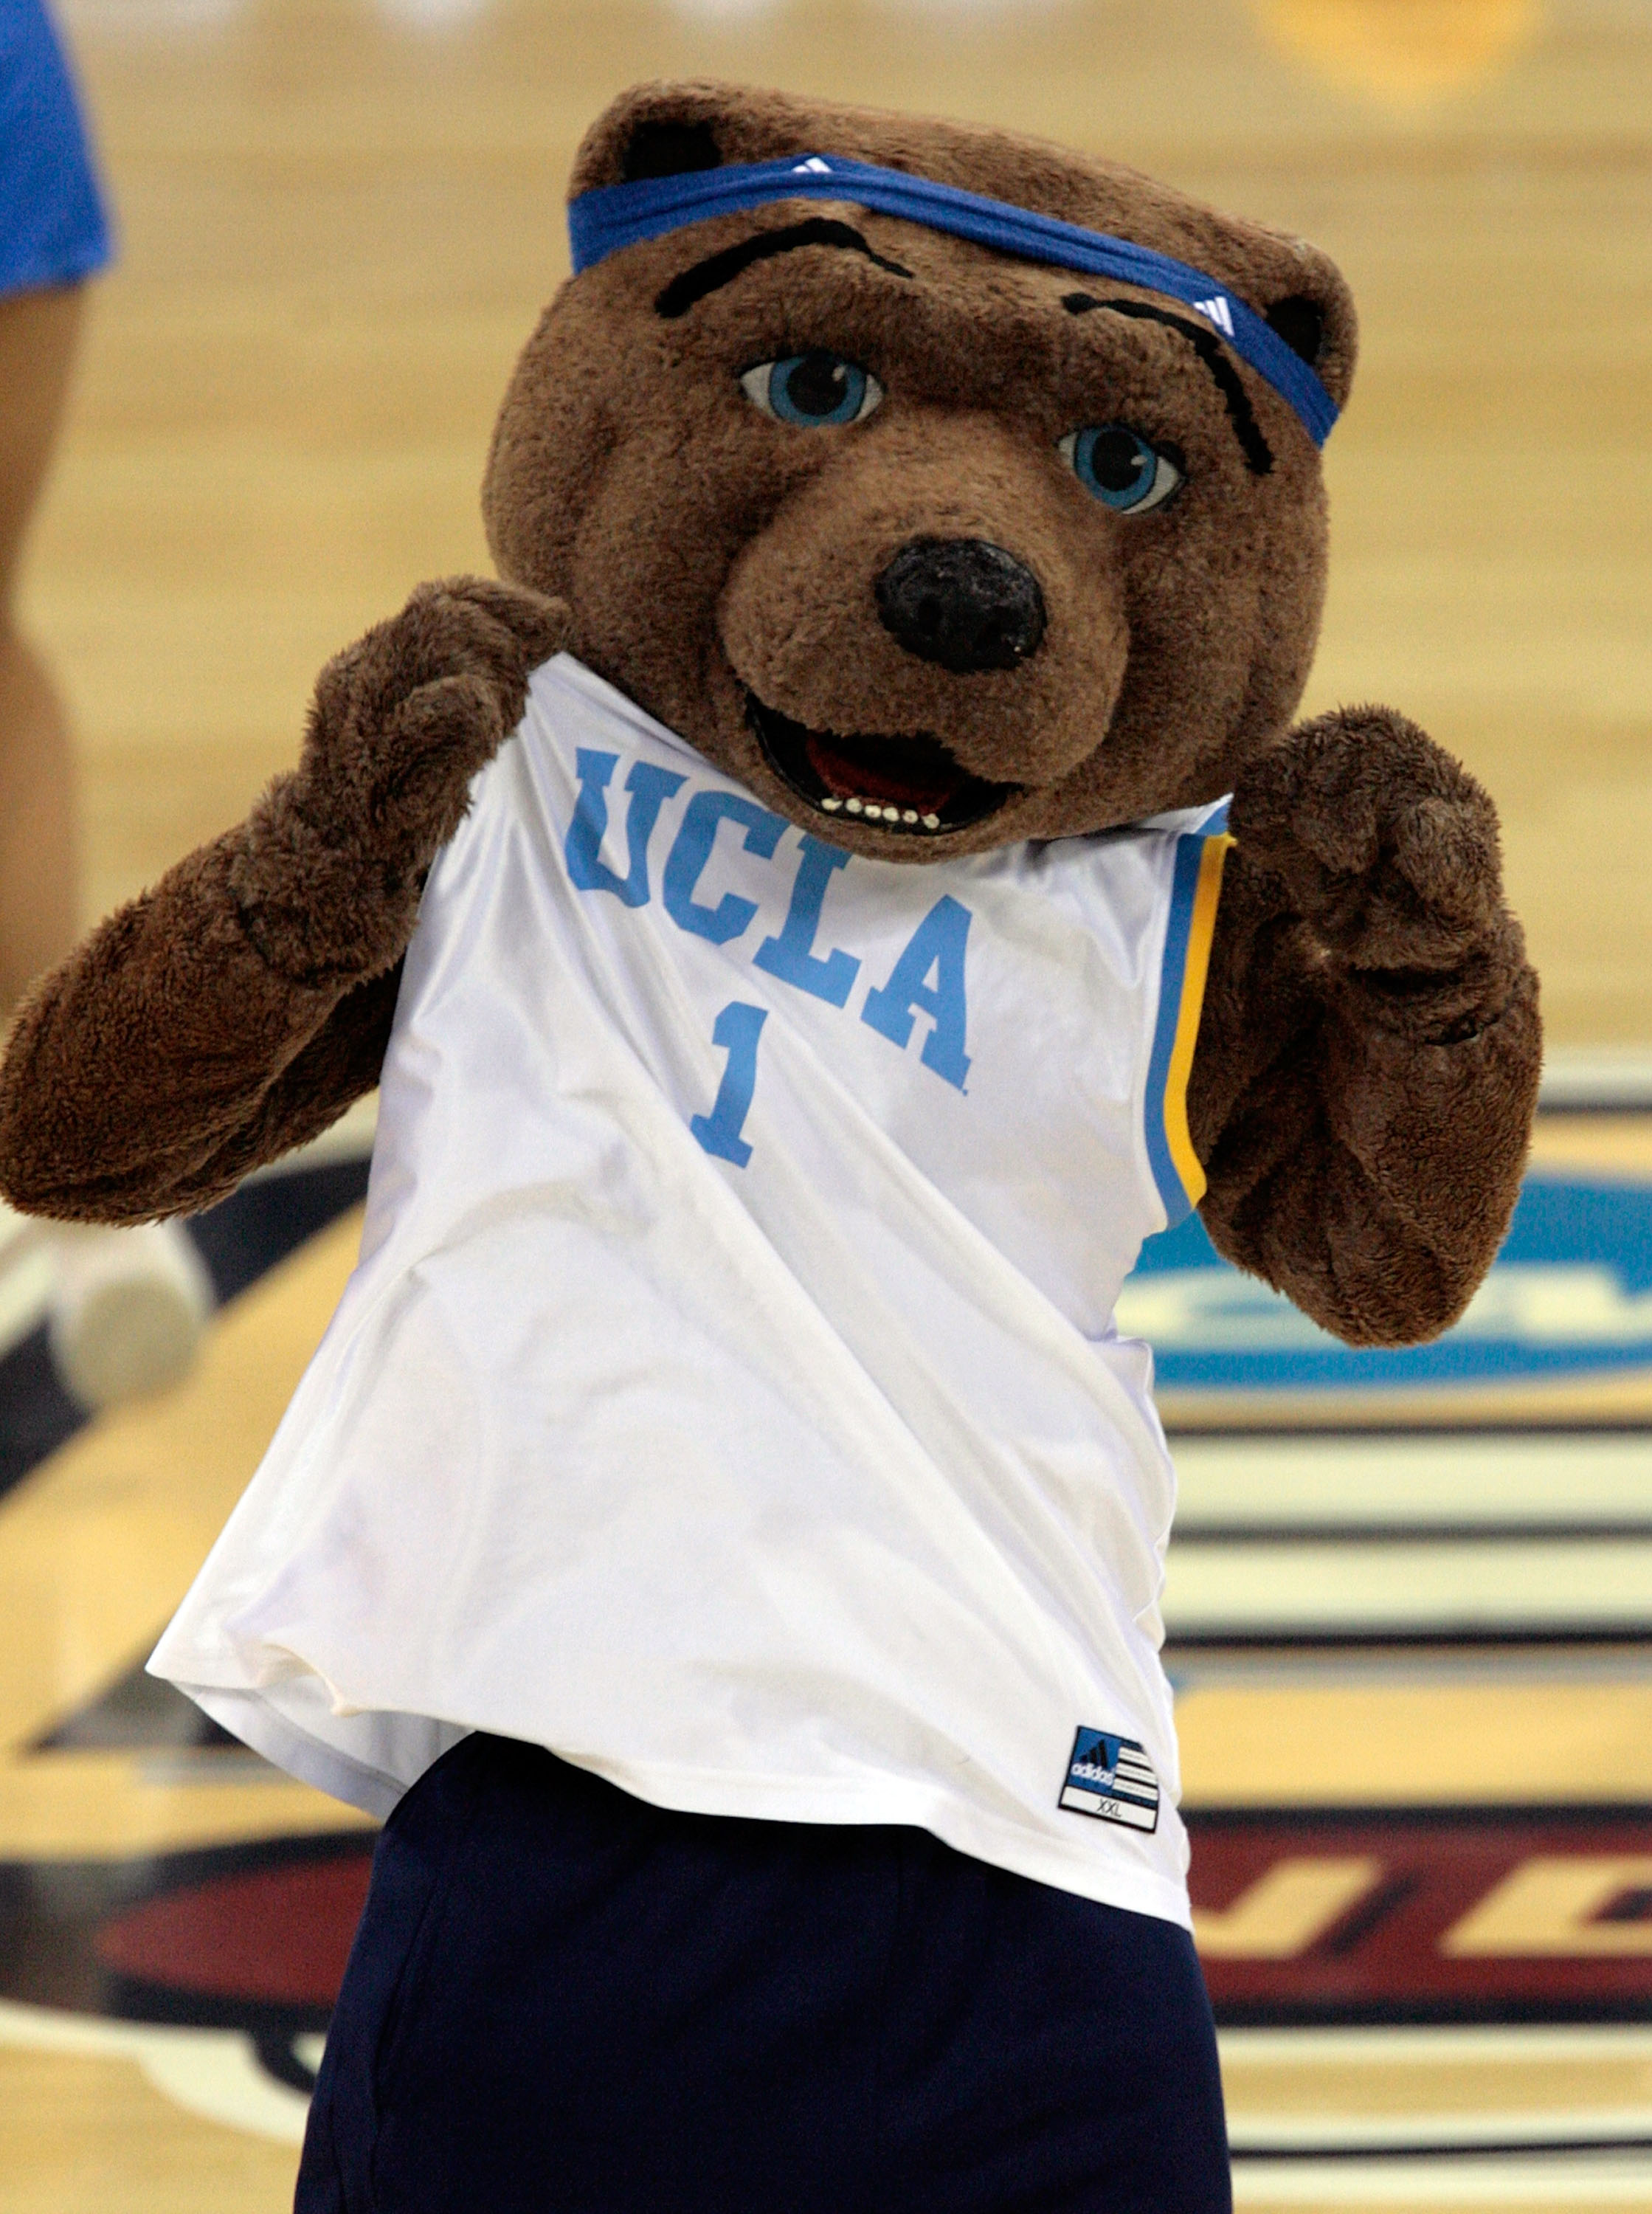 INDIANAPOLIS - APRIL 03:  Joe Bruin, the UCLA Bruins mascot. performs during a break in the game against the Florida Gators during the National Championship game of the NCAA Men's Final Four on April 3, 2006 at the RCA Dome in Indianapolis, Indiana.  The